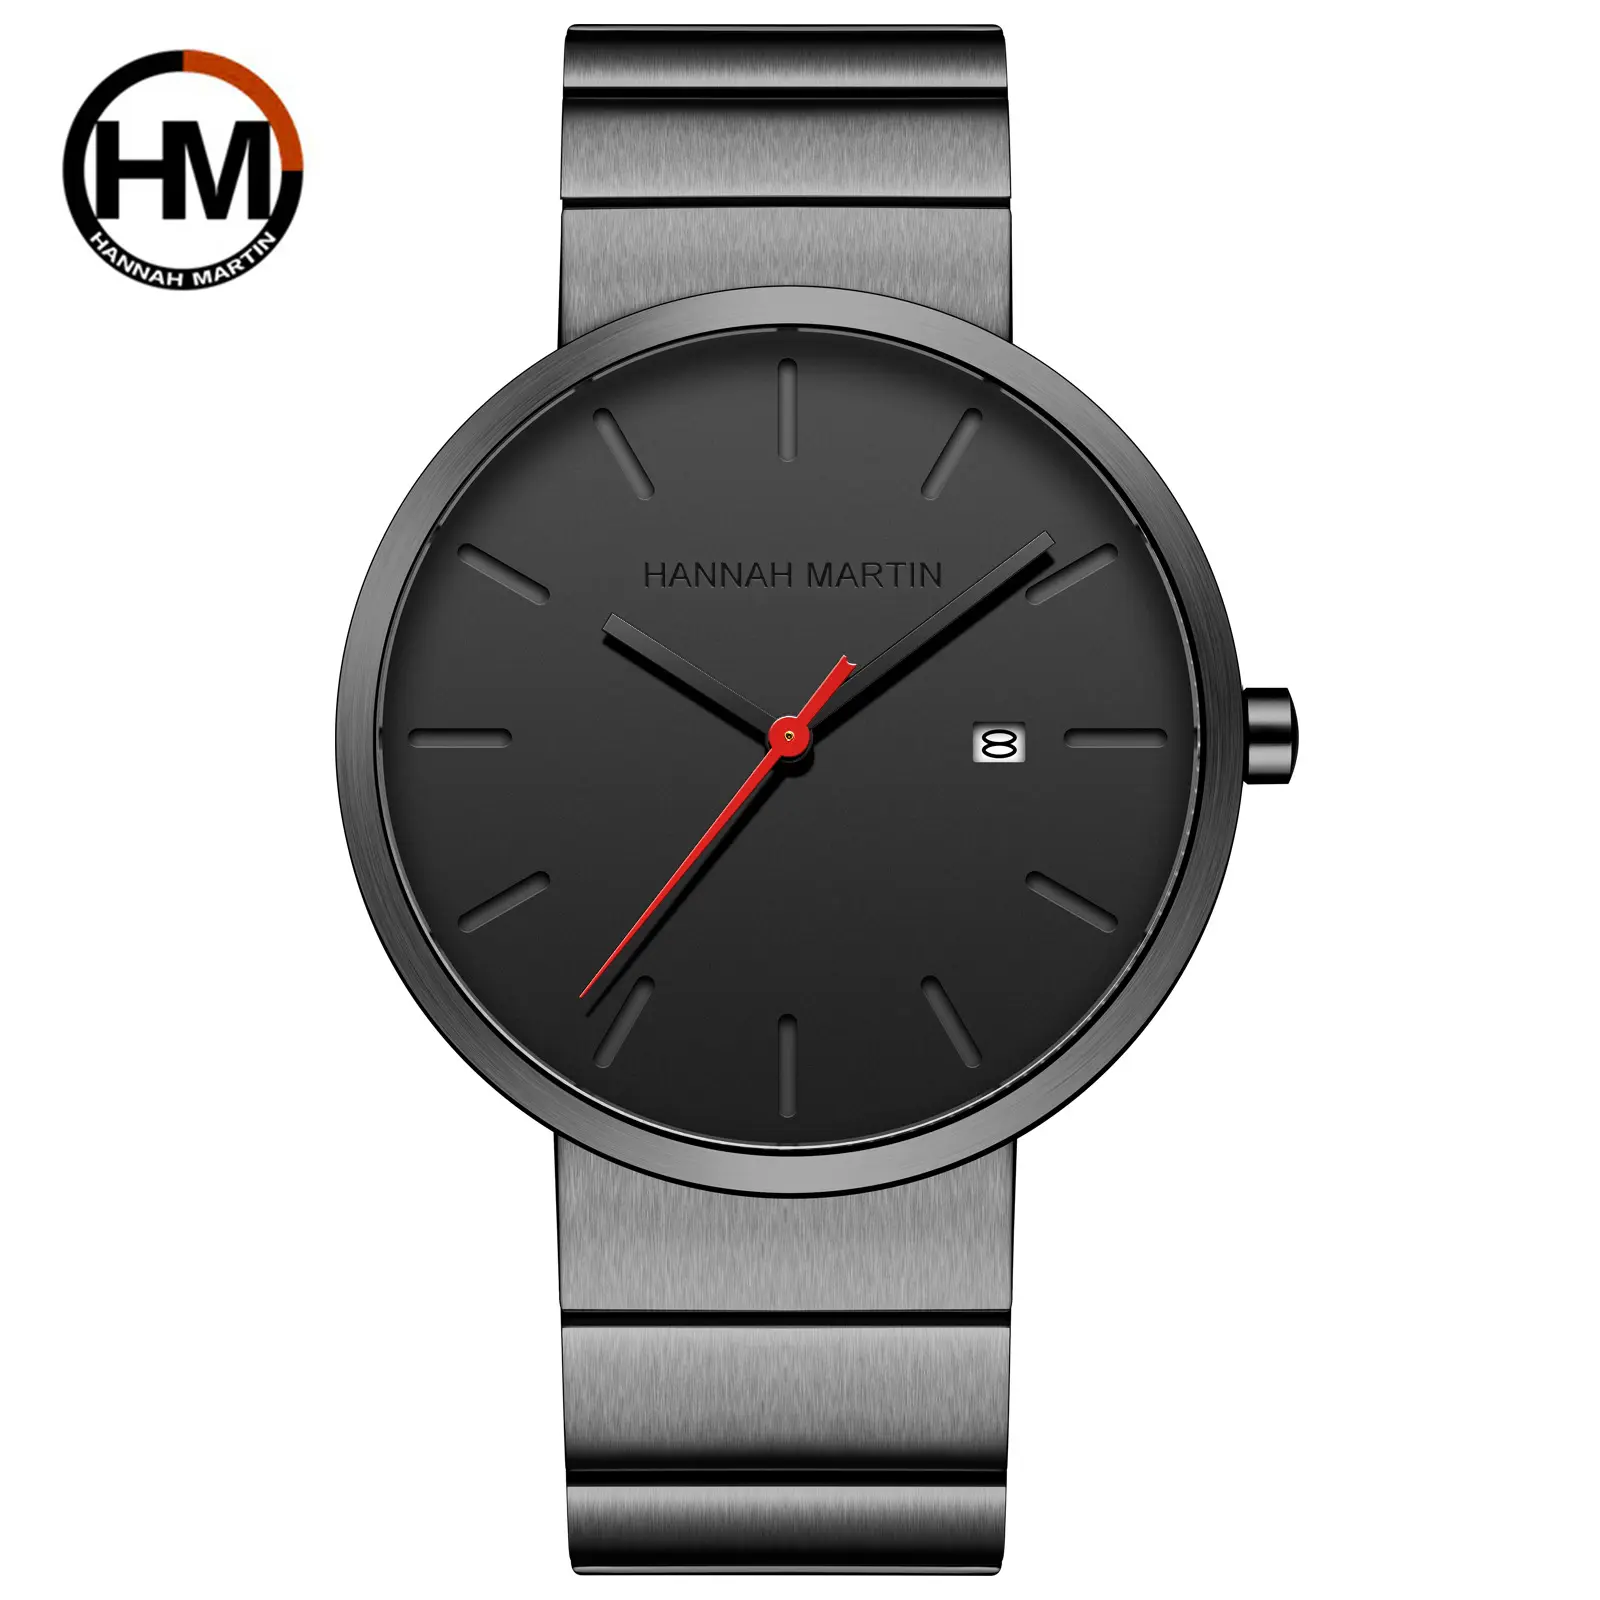 hannah martin 1311 dropshipping black universe quartz watch genius Stainless steel band water resist Simple stylish business